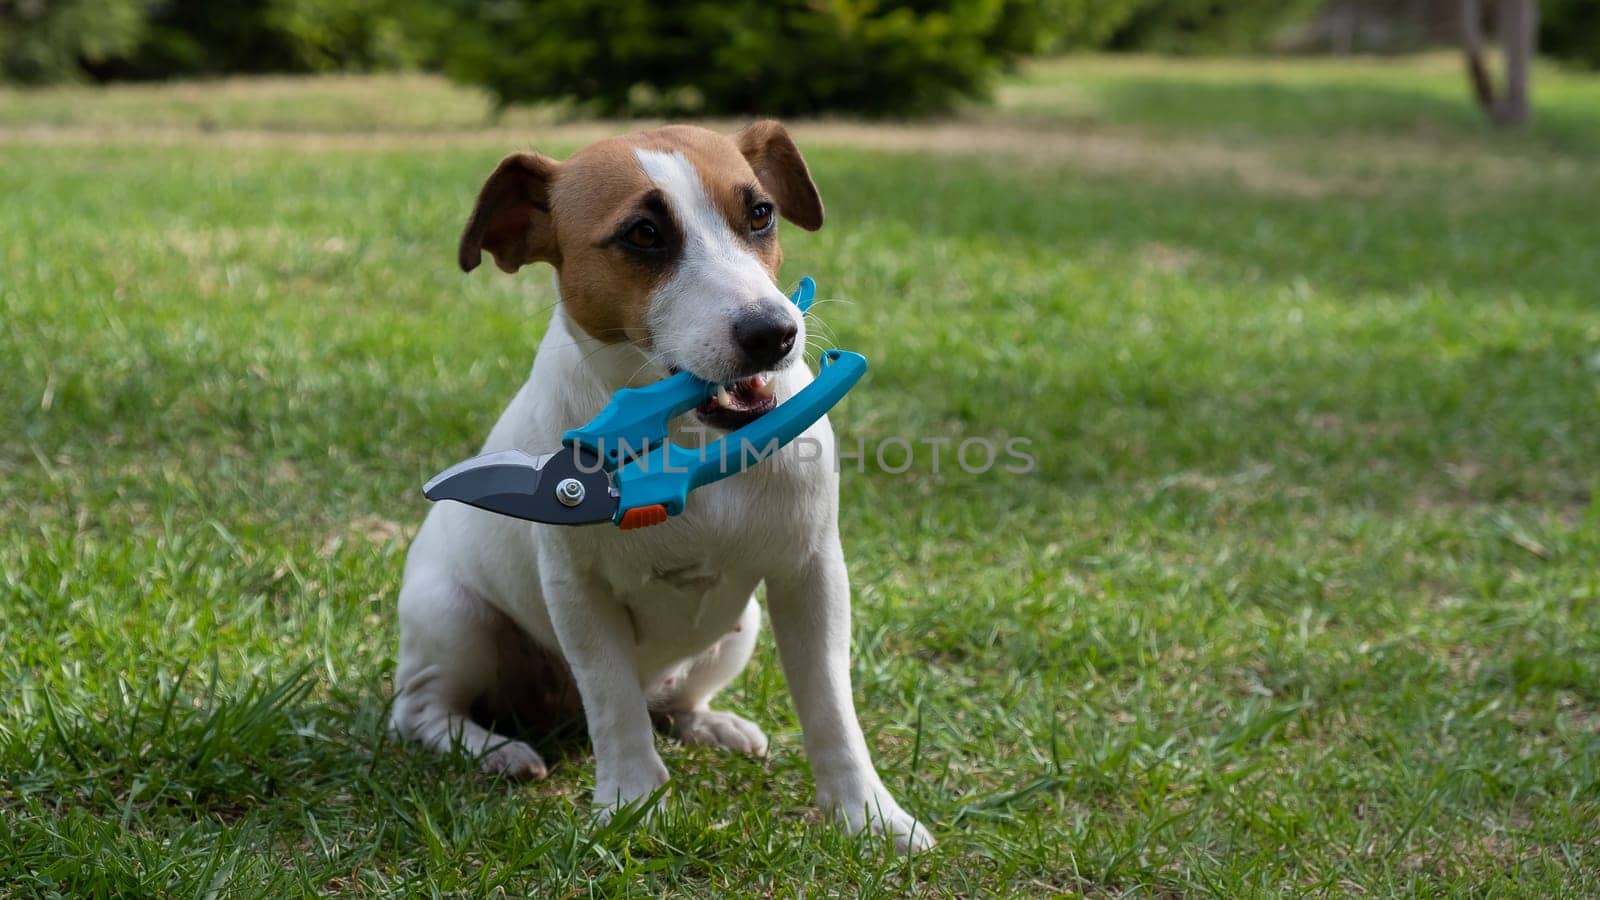 The dog is holding a pruner tool. Jack russell terrier holds gardener tools and is engaged in farming